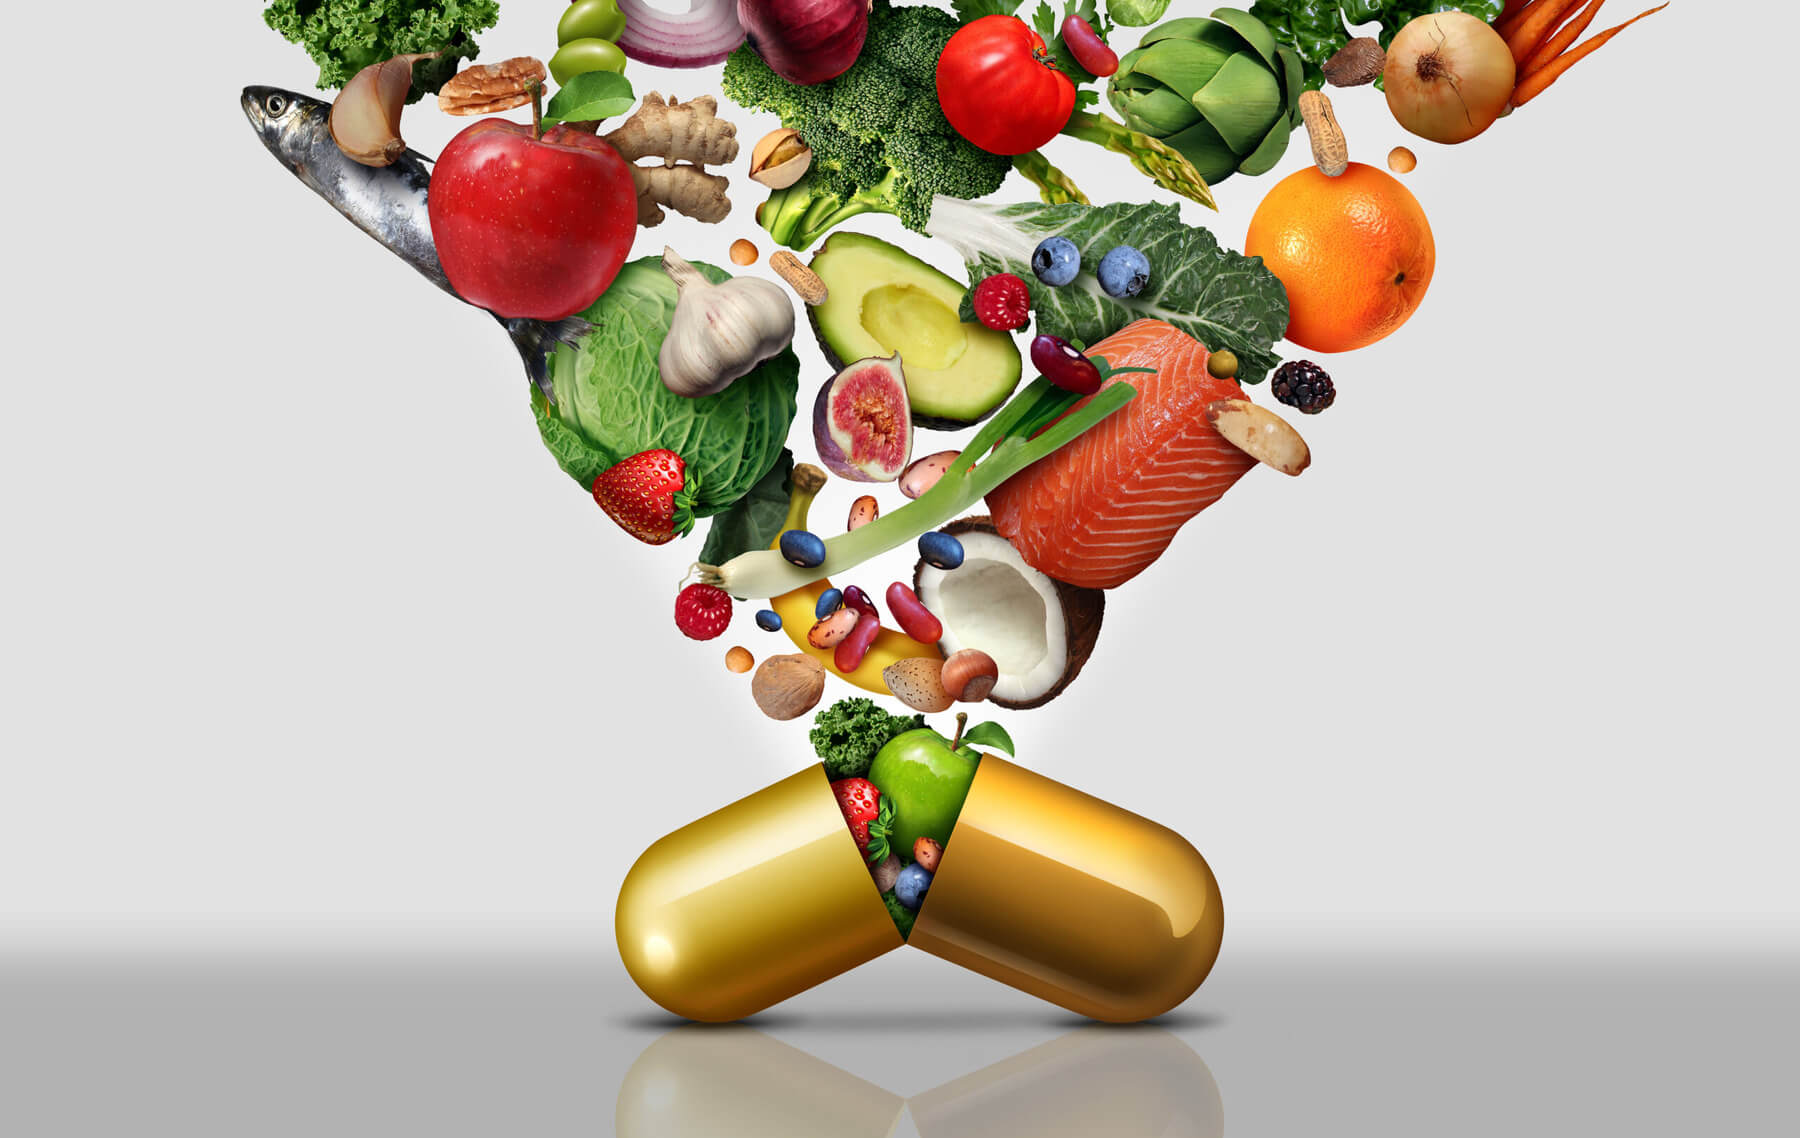 A golden pill capsule filled with healthy fruits, vegetables, and proteins like fish to promote human health